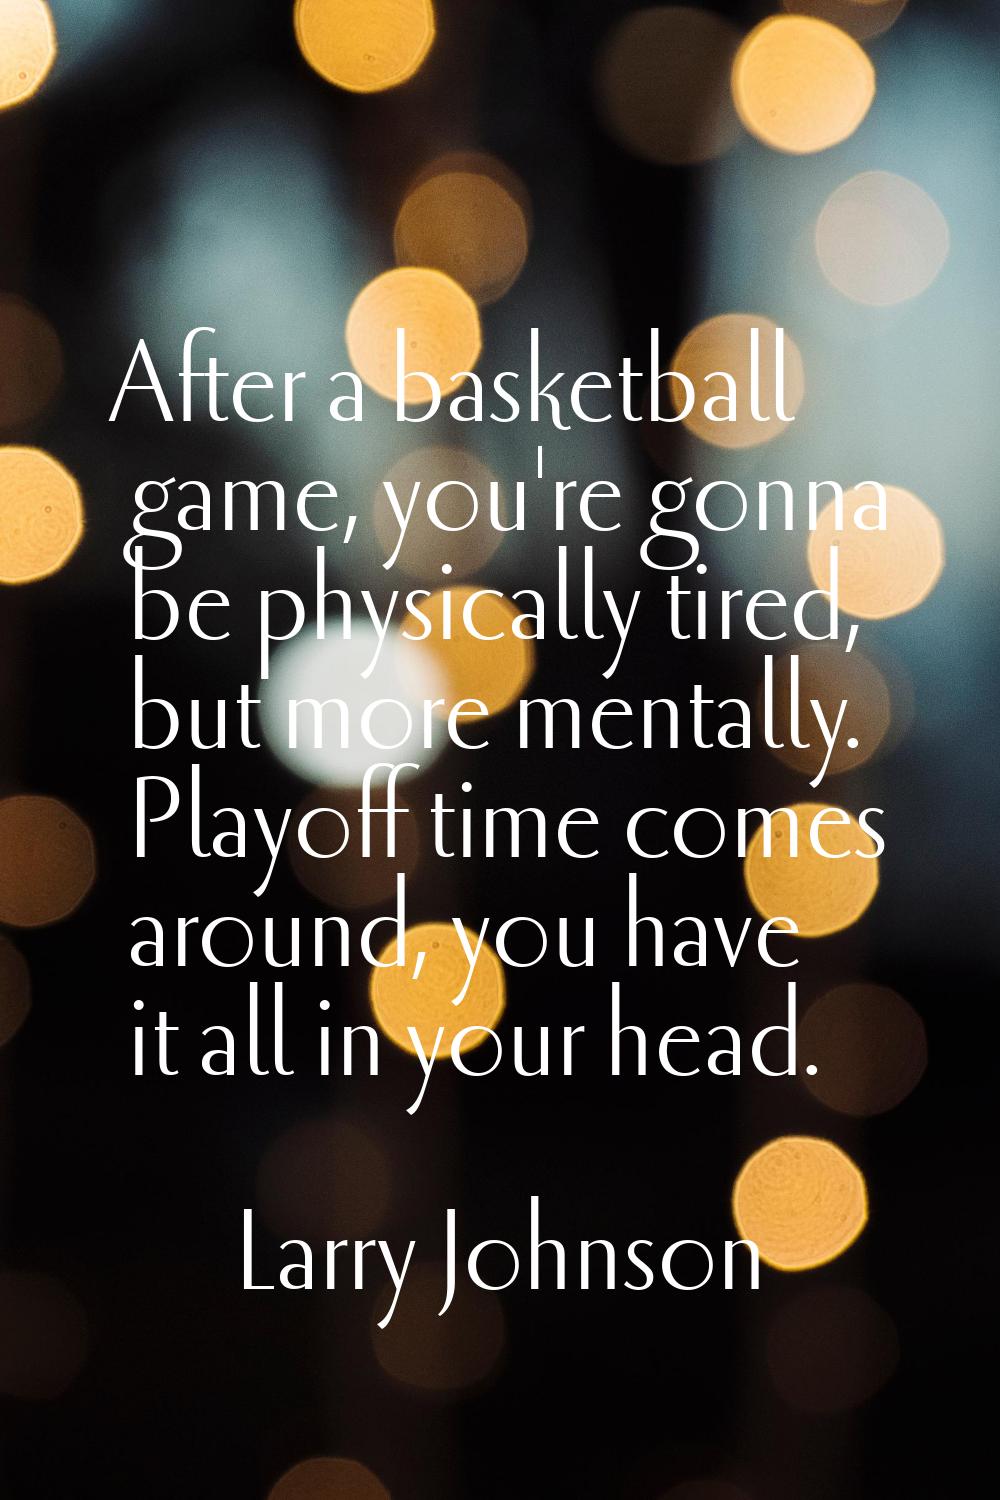 After a basketball game, you're gonna be physically tired, but more mentally. Playoff time comes ar